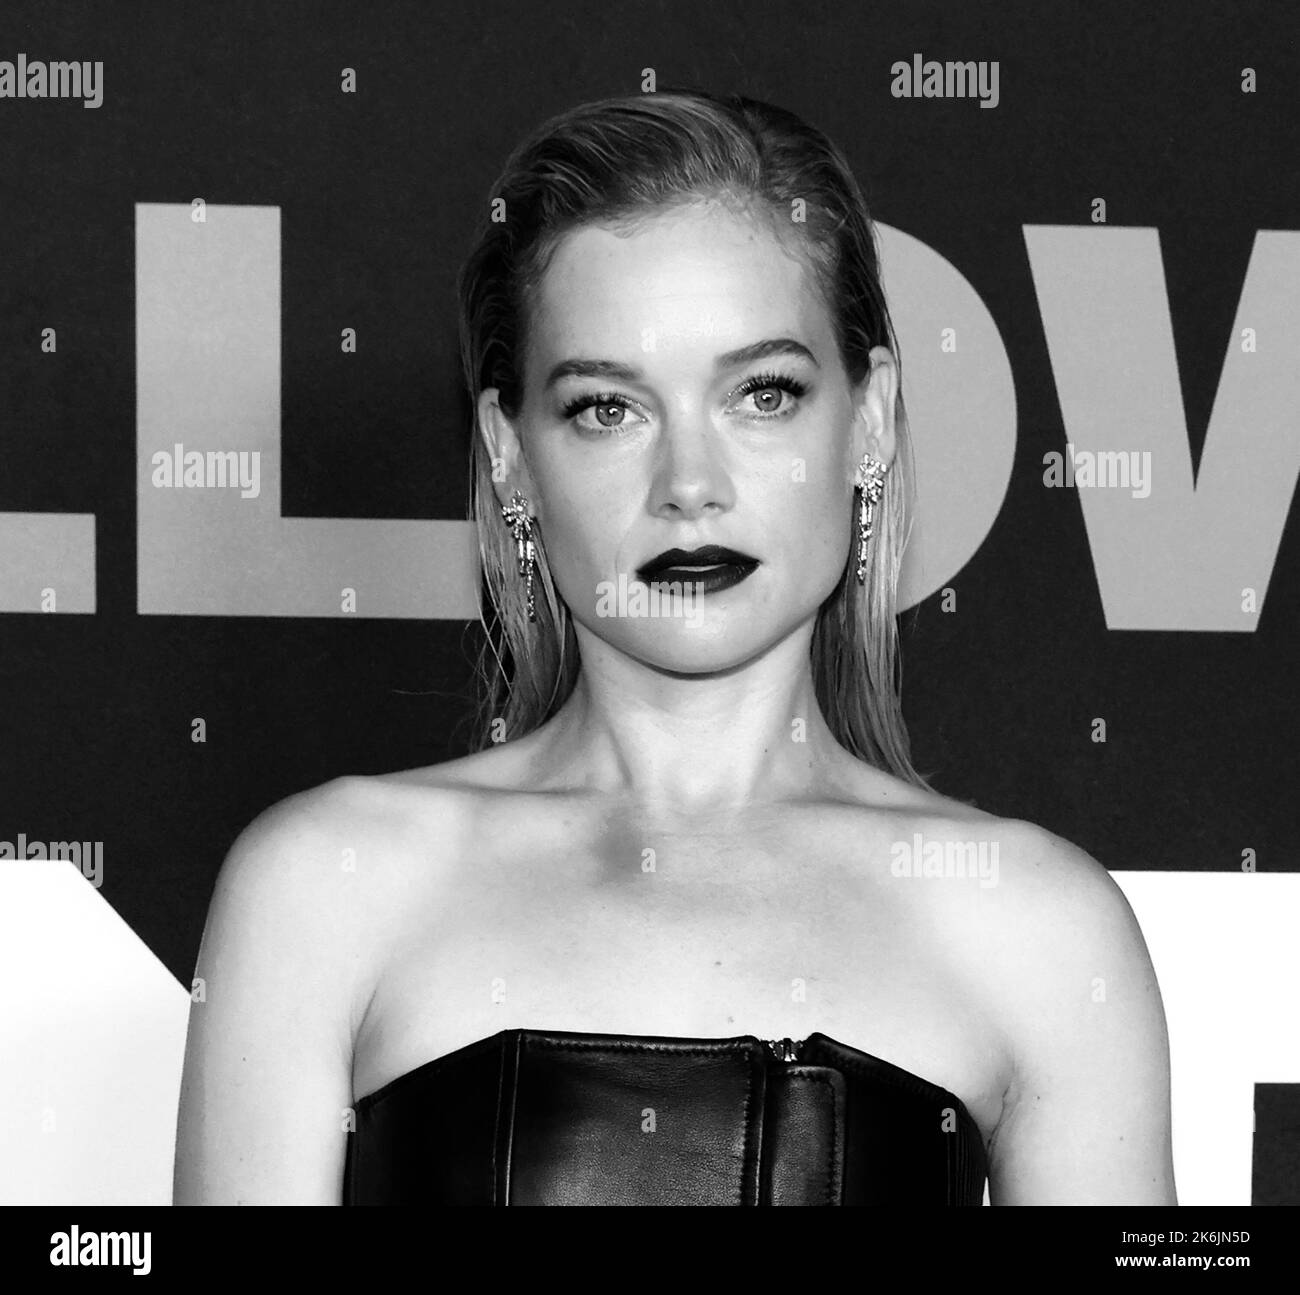 Los Angeles, USA - Oct 11, 2022: Jane Levy attends the premiere of 'Halloween Ends' held at TCL Chinese Theatre Stock Photo